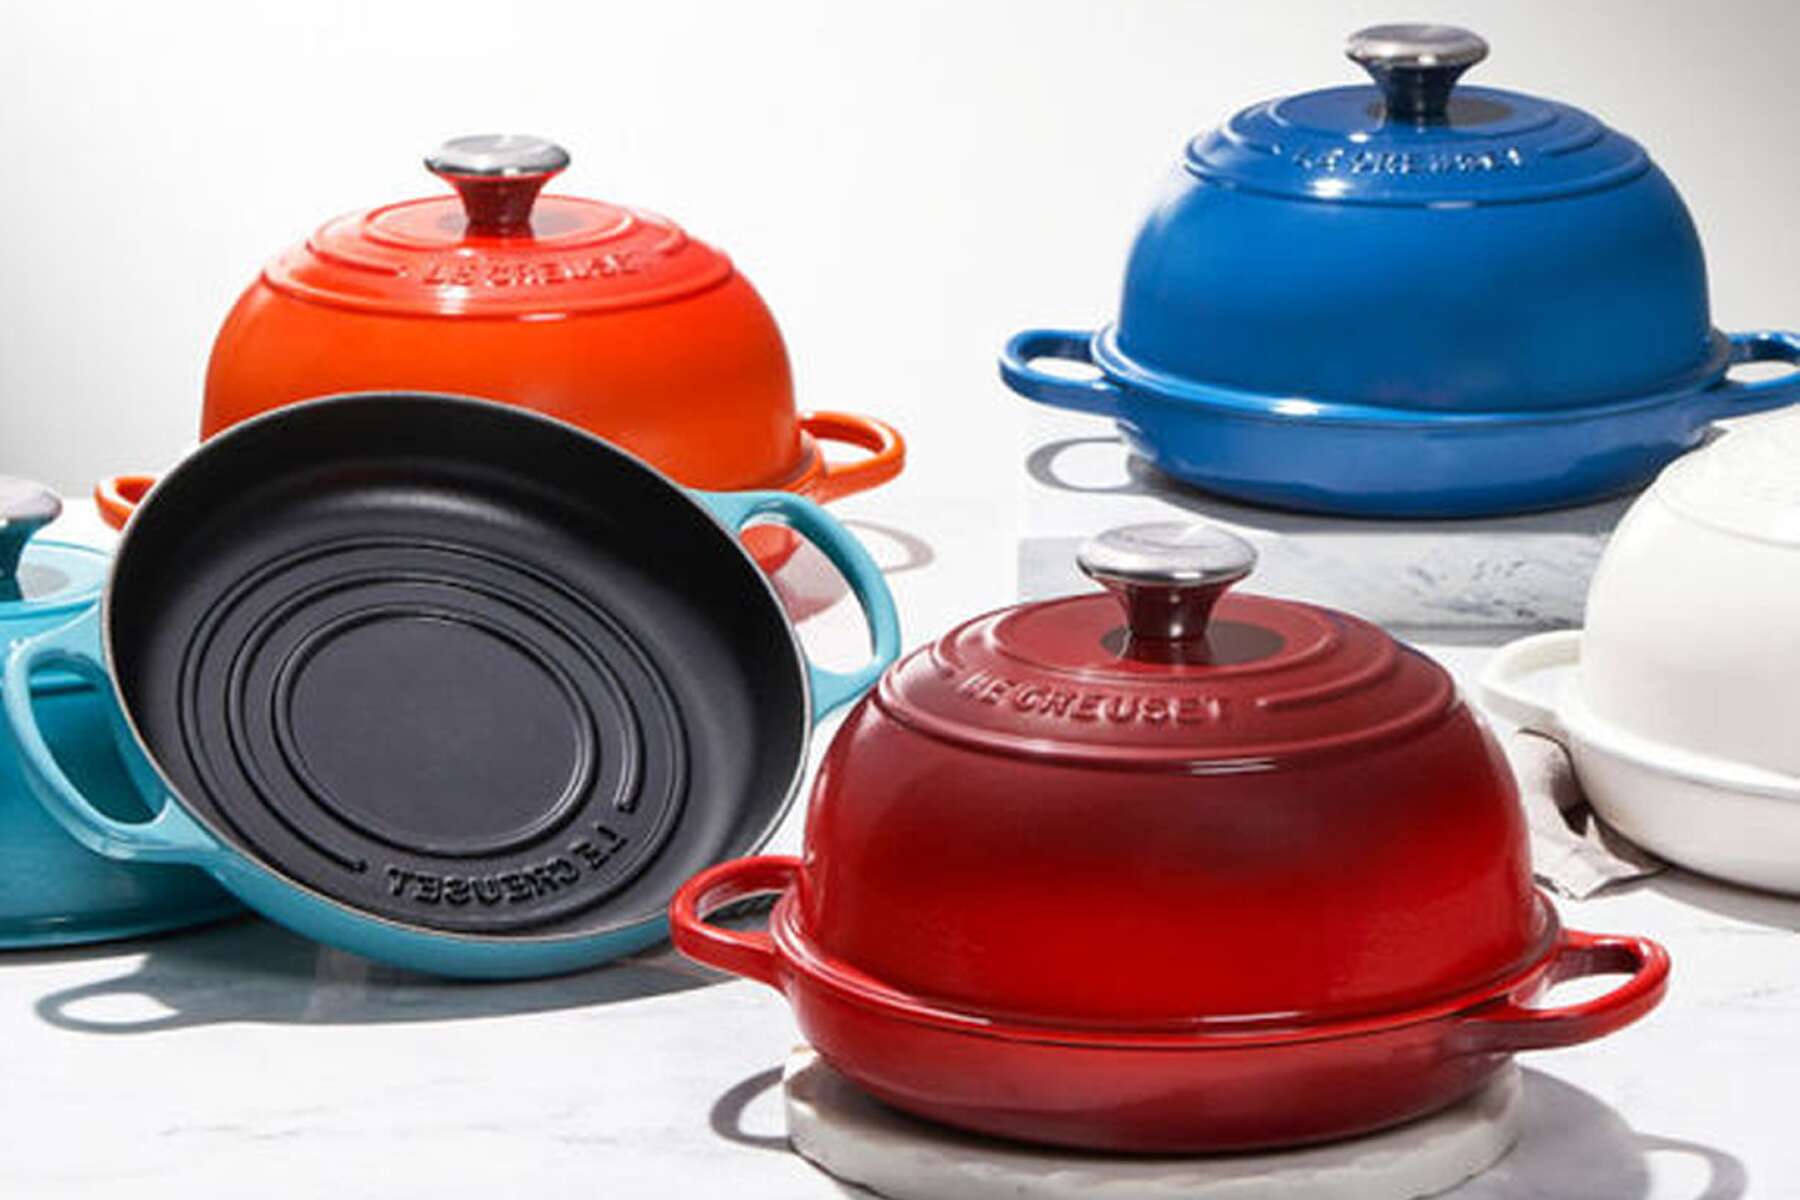 Le Creuset is giving away a free bread oven